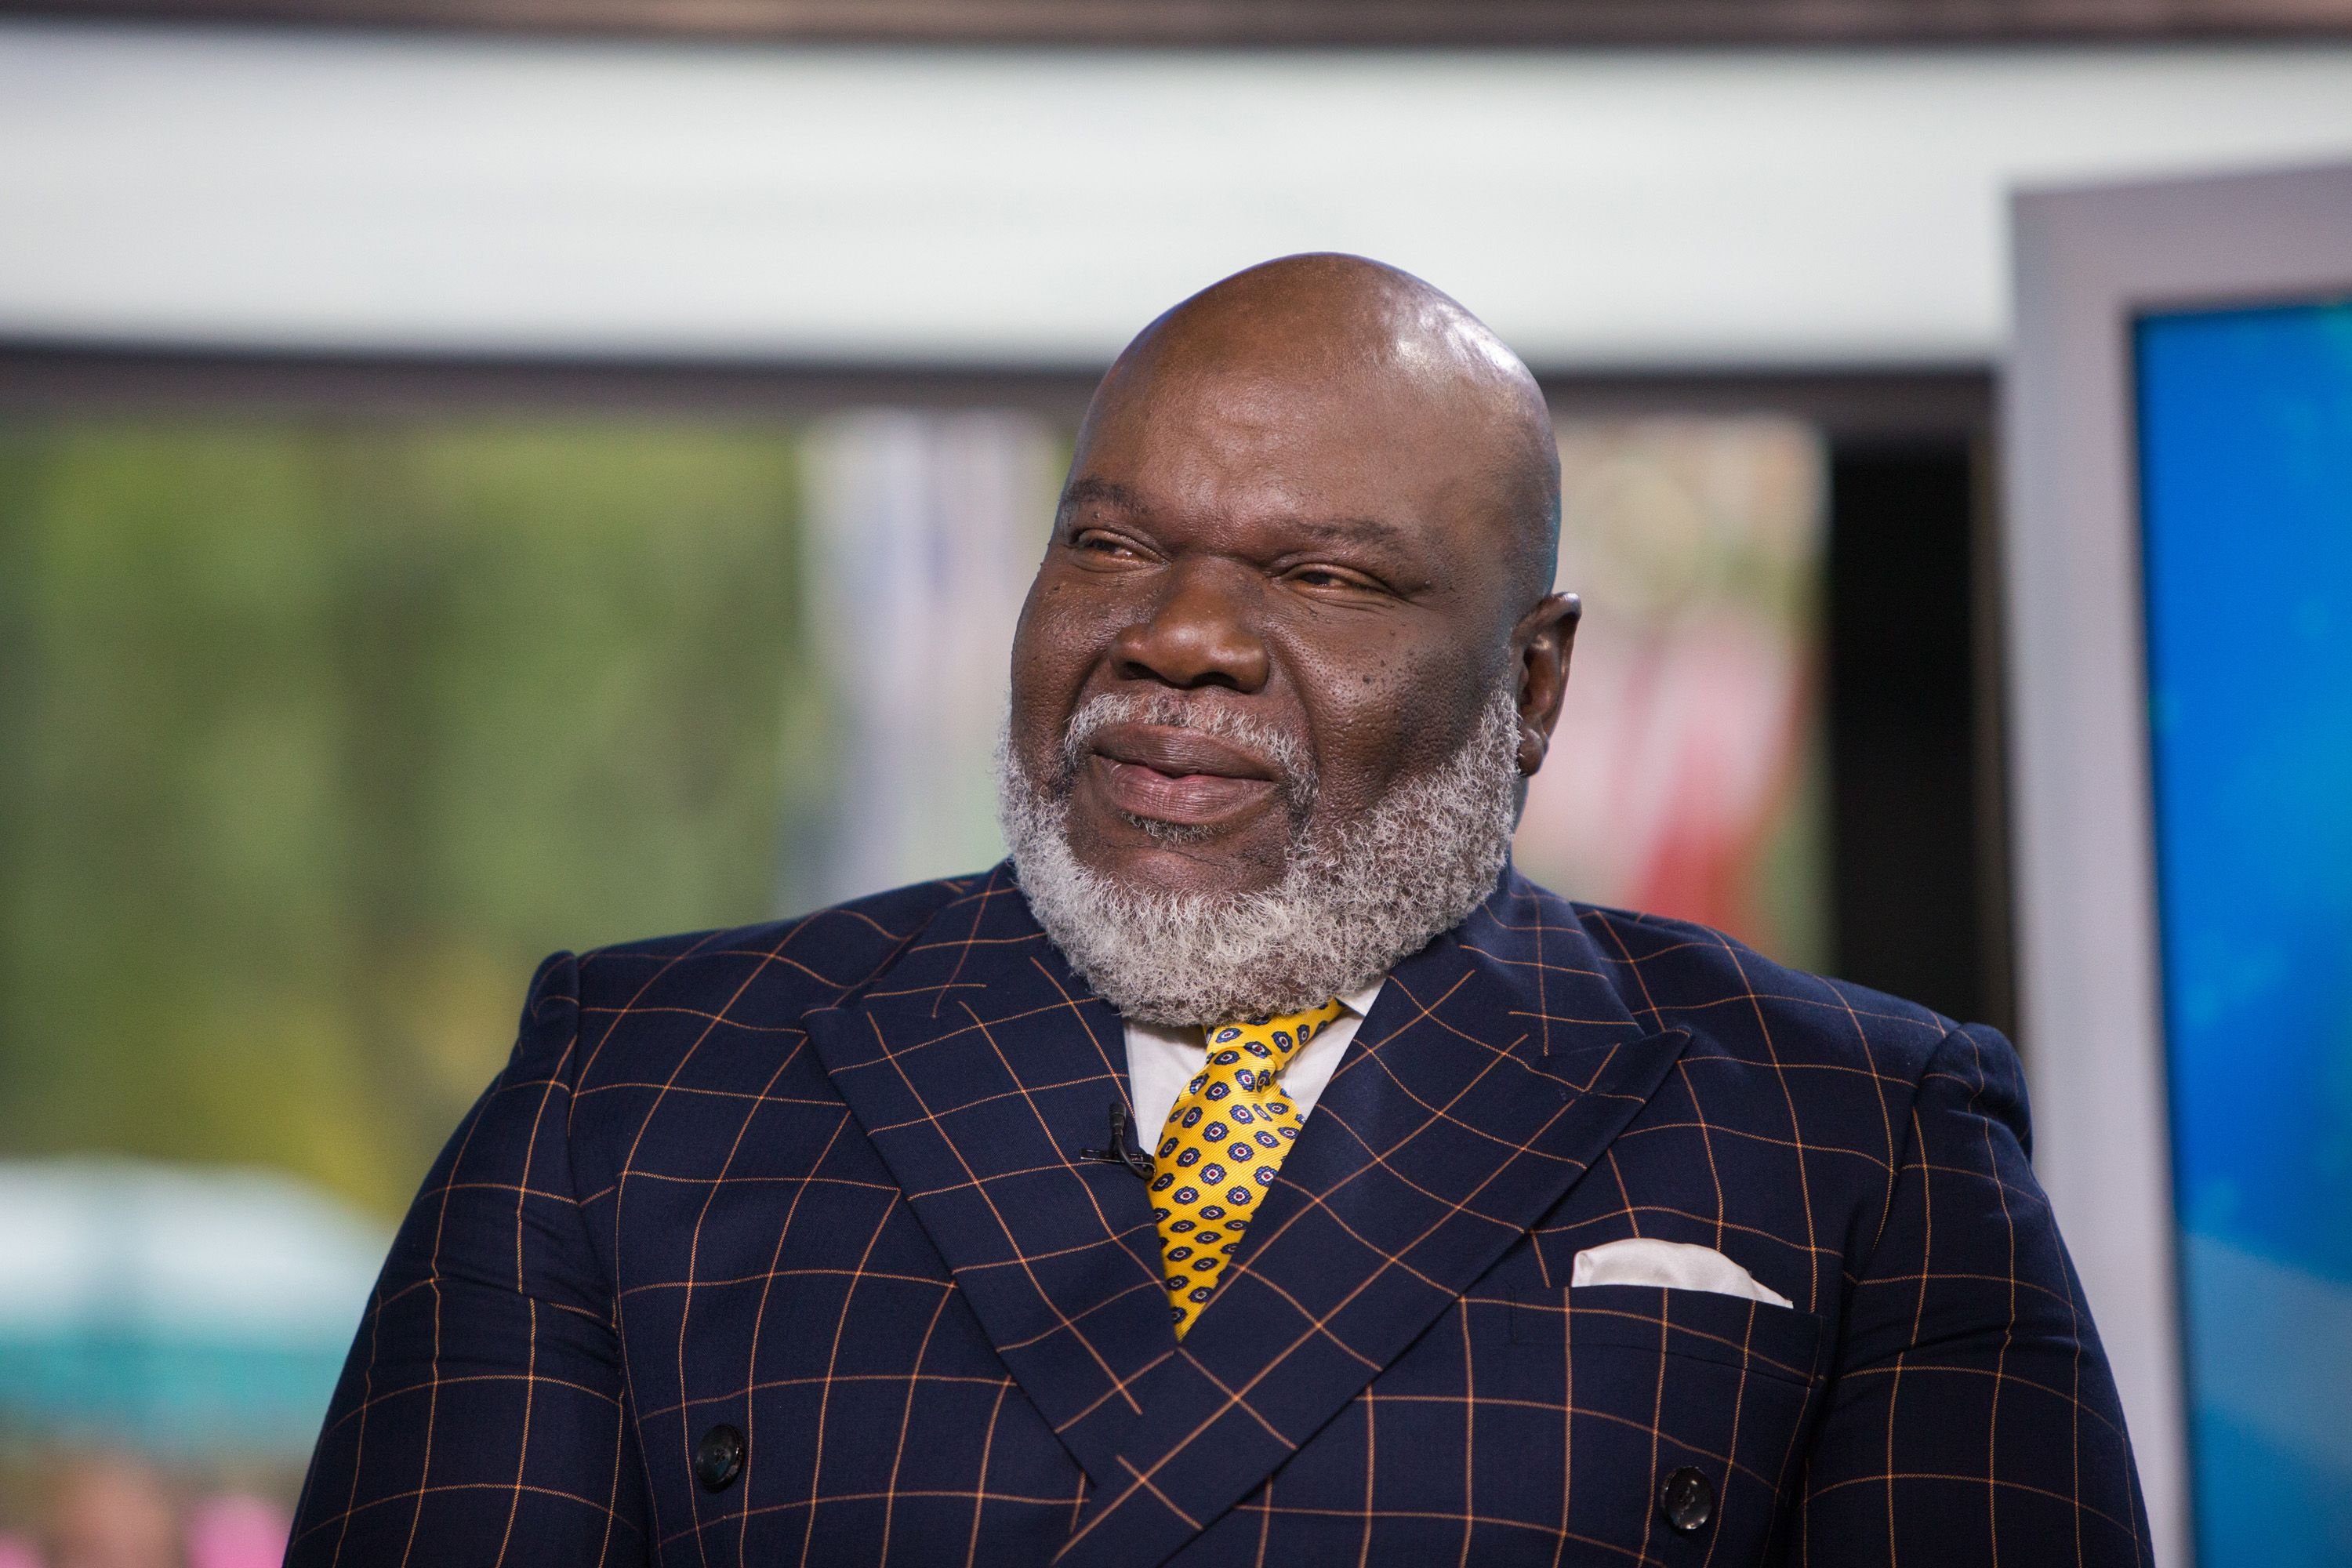 Bishop T.D. Jakes sits down for a television interview on October 9, 2017 | Source: Nathan Congleton/NBCU Photo Bank/NBCUniversal via Getty Images